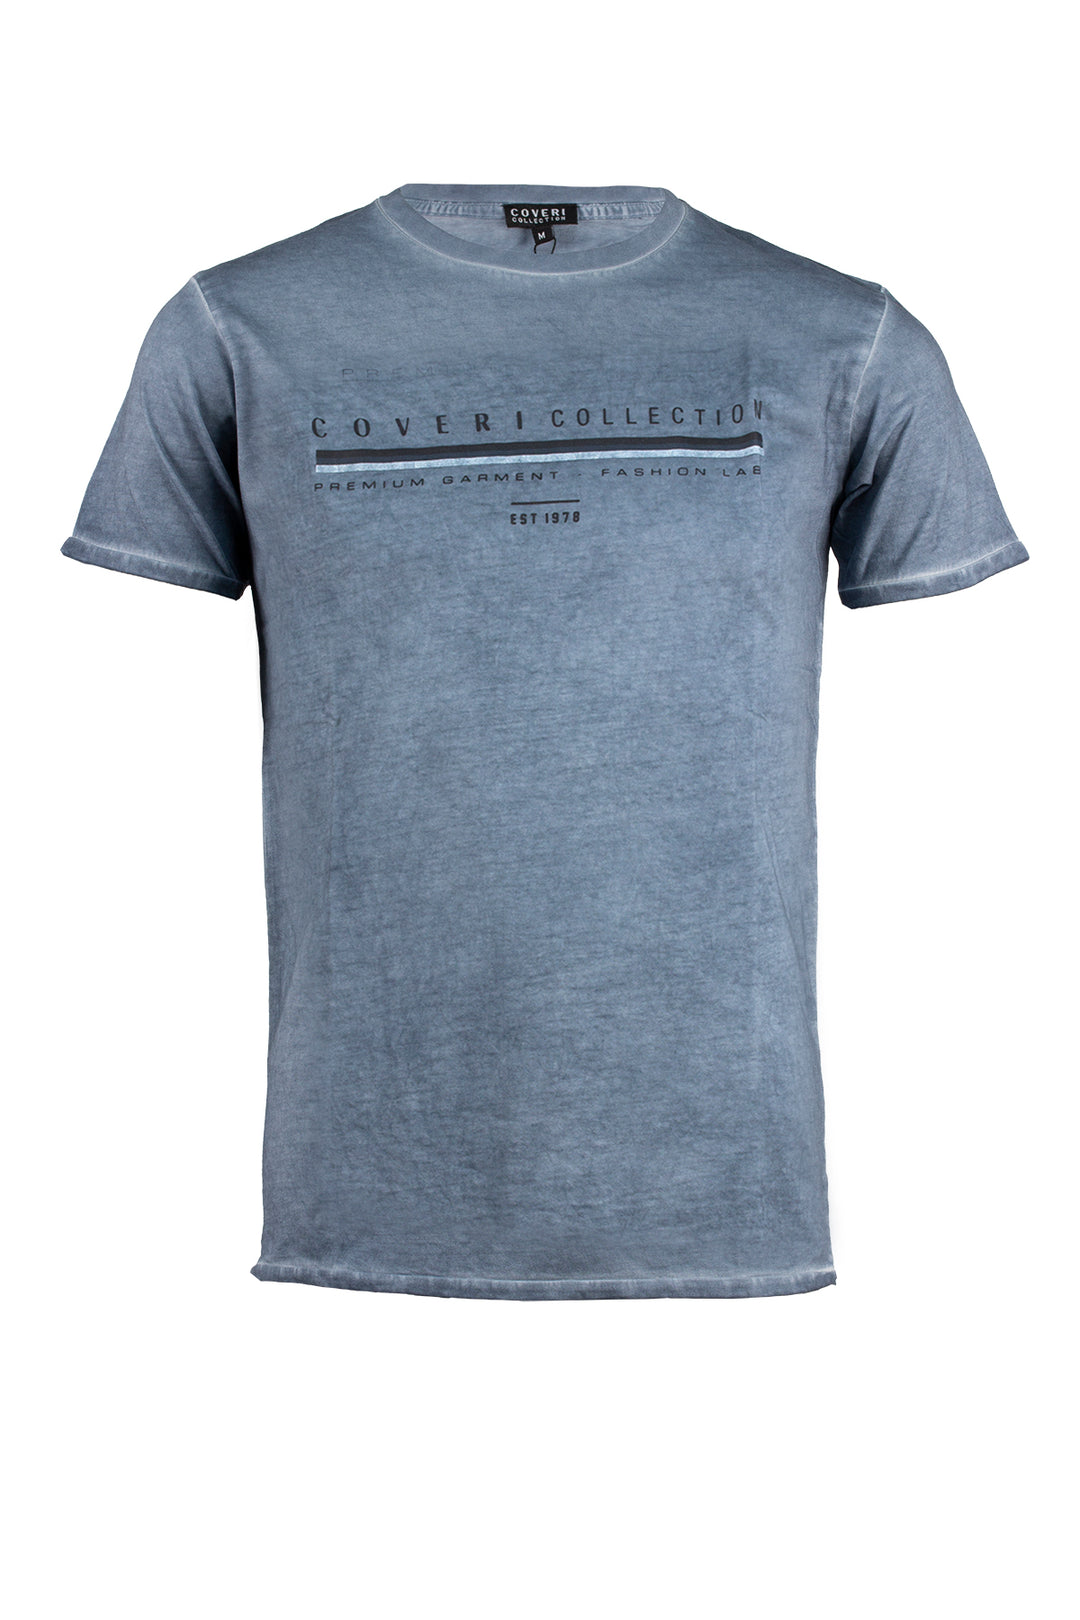 T-Shirt uomo Coveri Collection